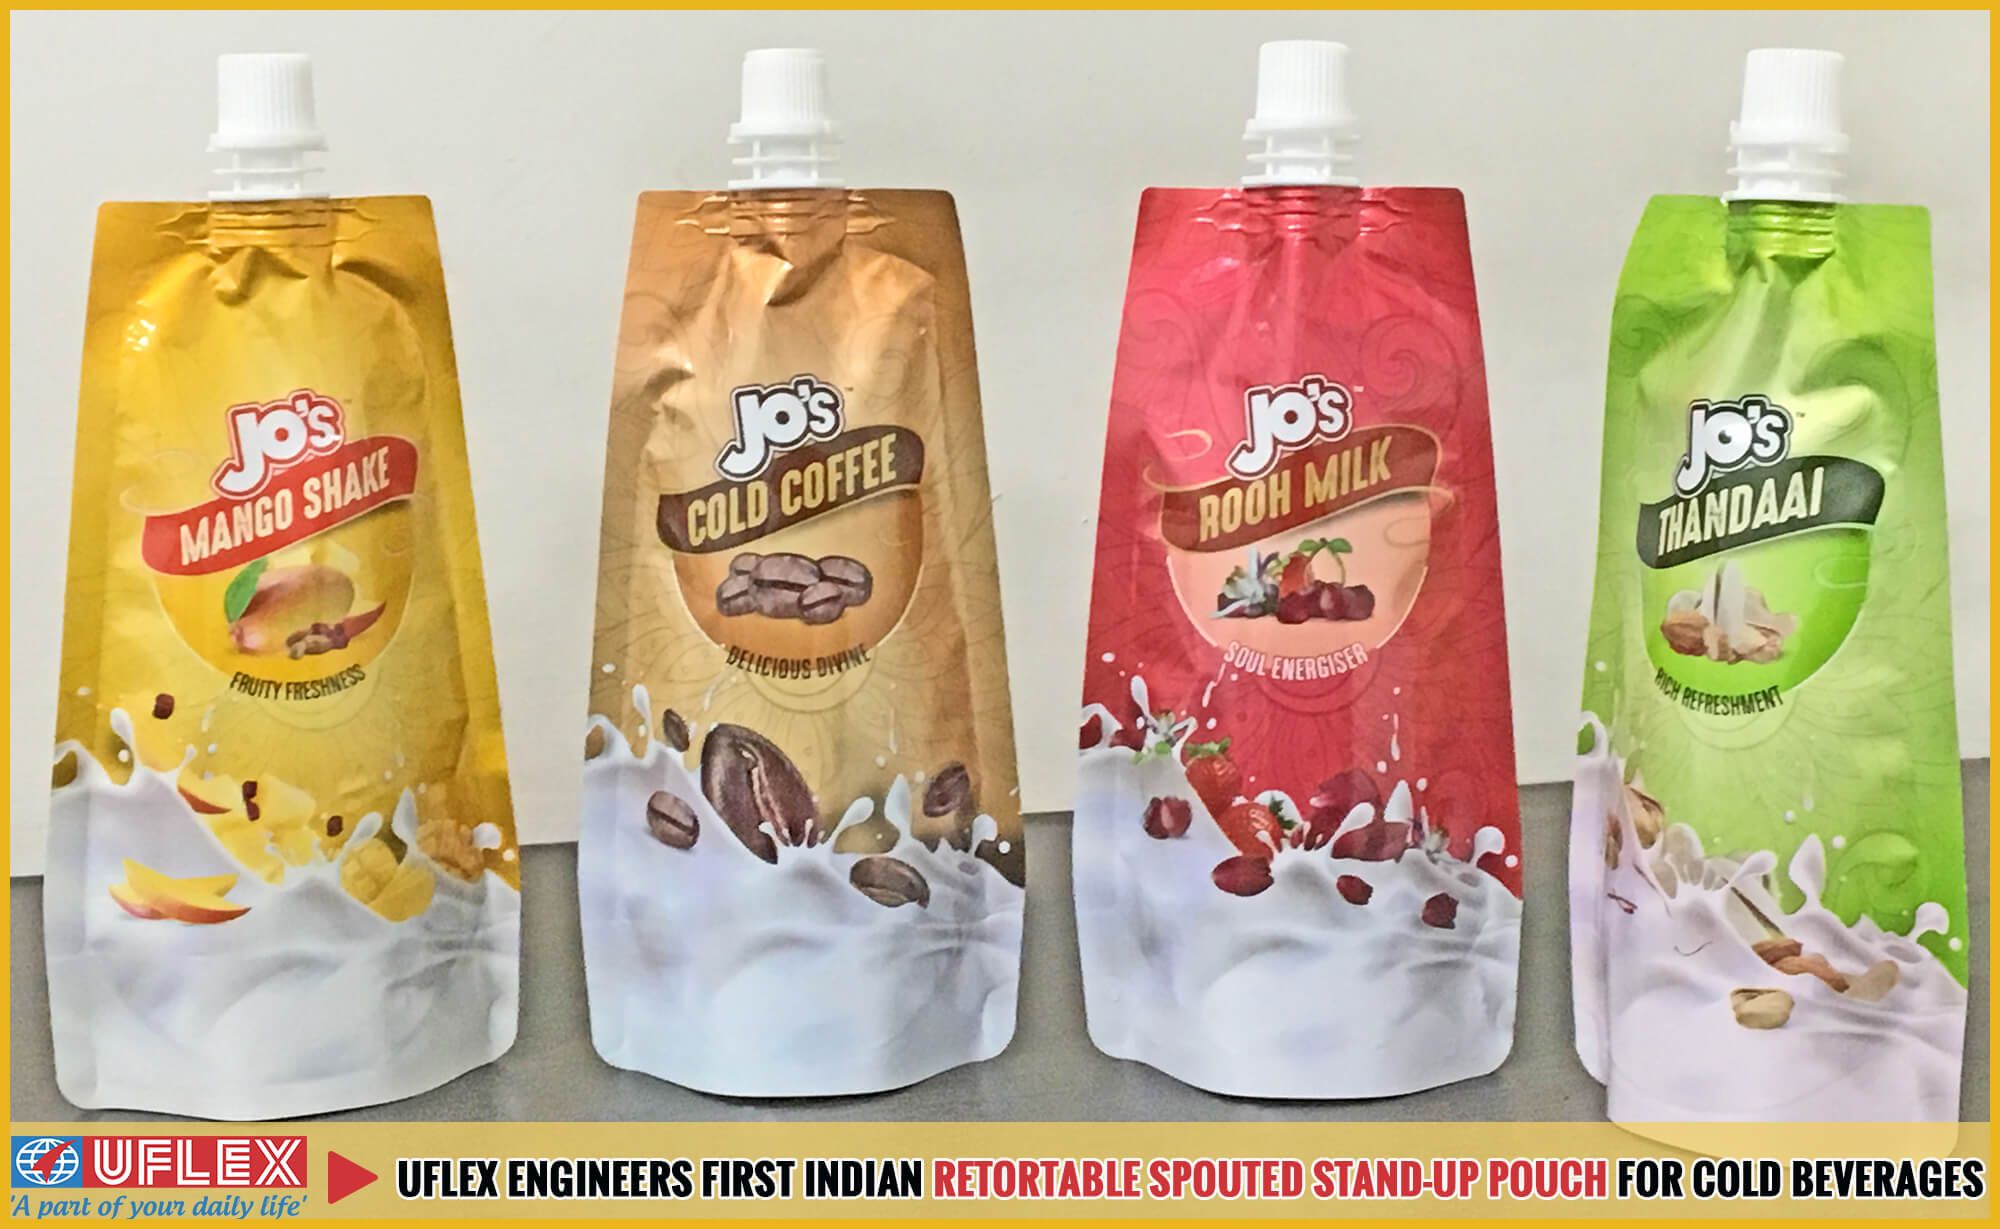 Uflex engineers first Indian retortable spouted stand-up pouch for cold beverages